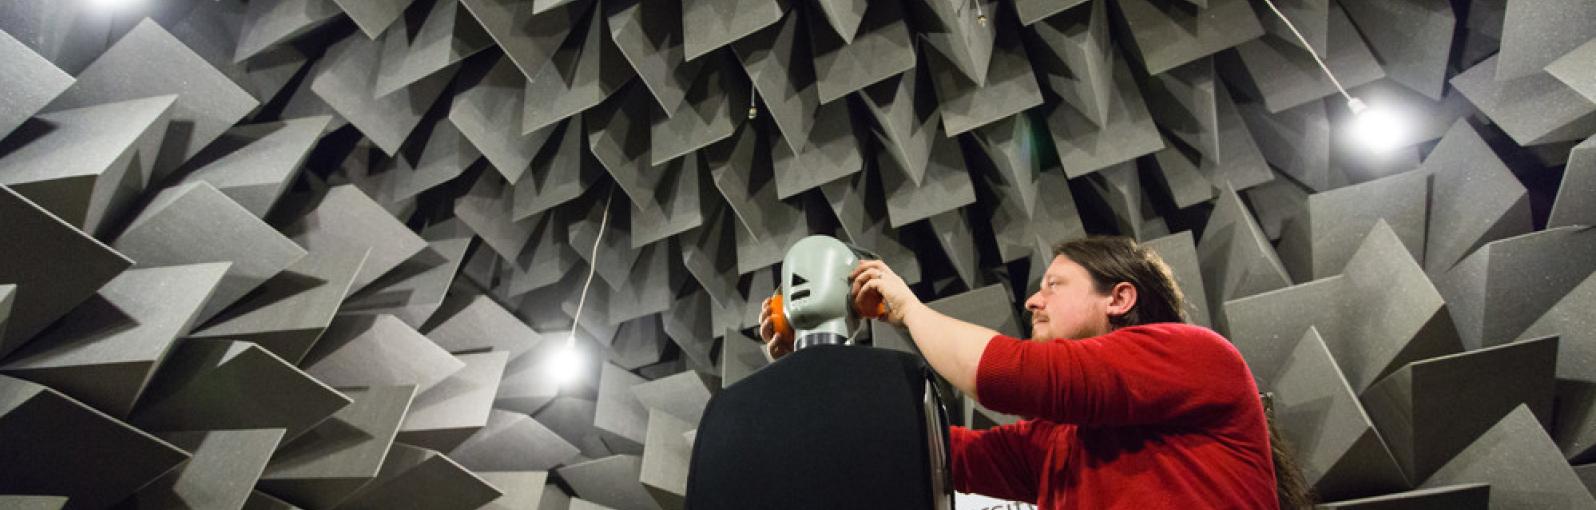 Student setting up an experiment in the anechoic chamber, University of Salford